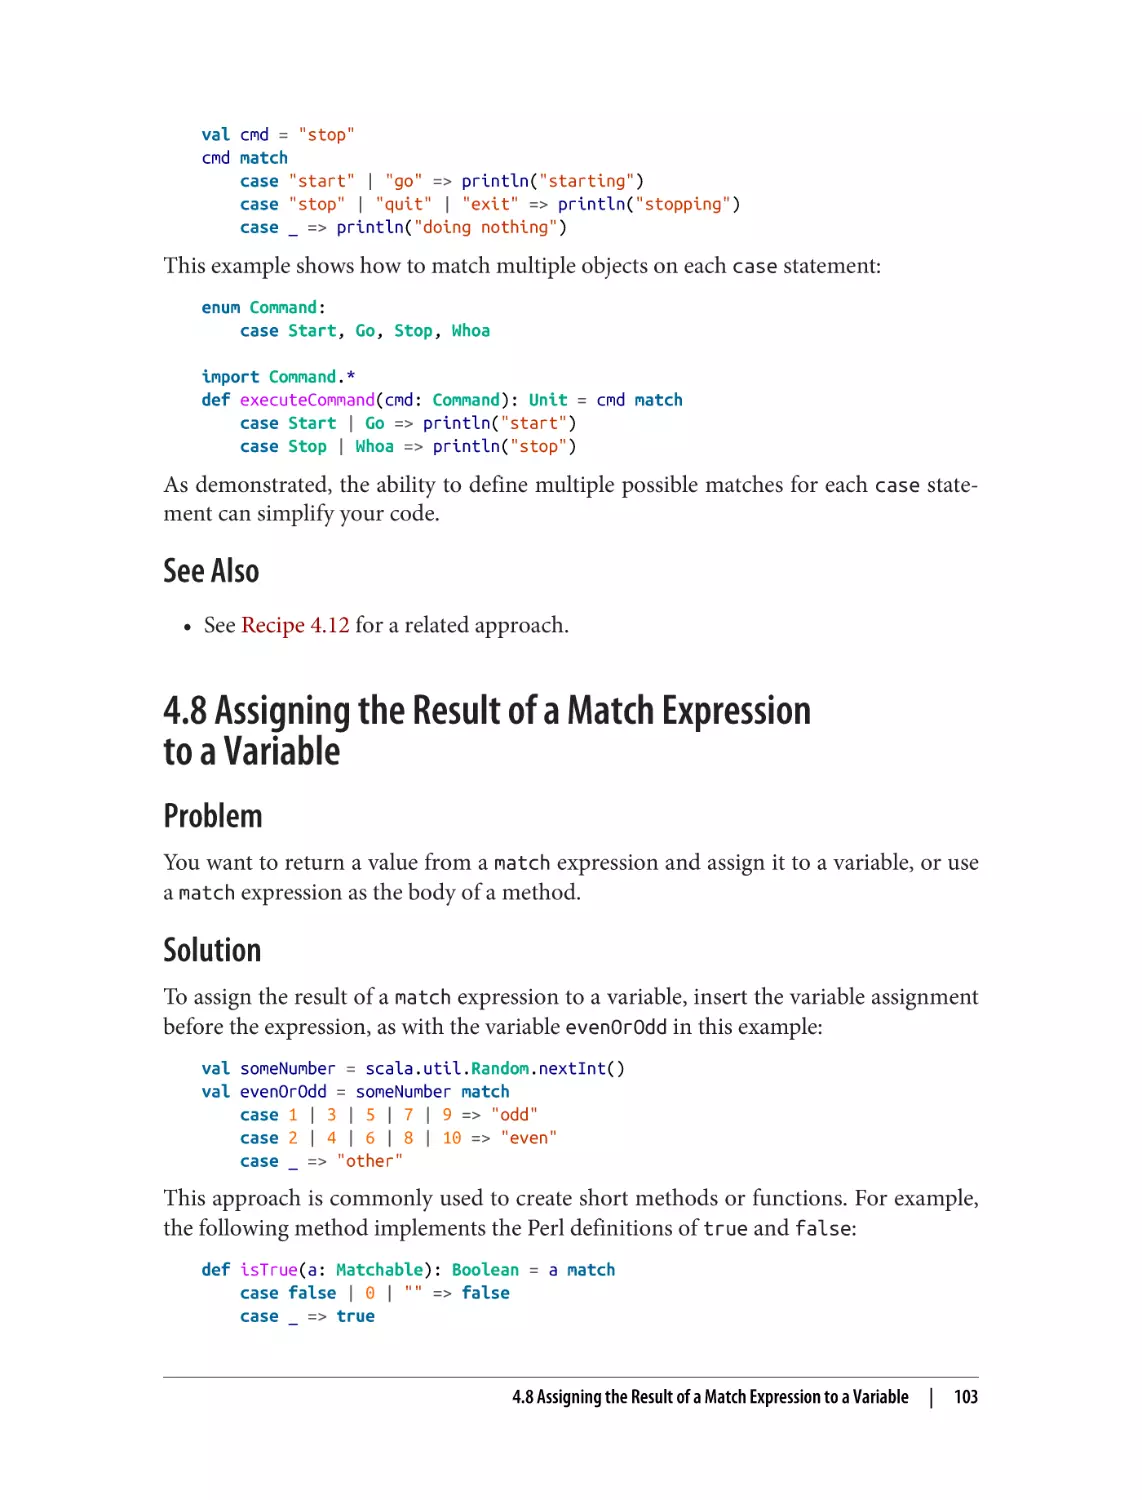 See Also
4.8 Assigning the Result of a Match Expression
Problem
Solution